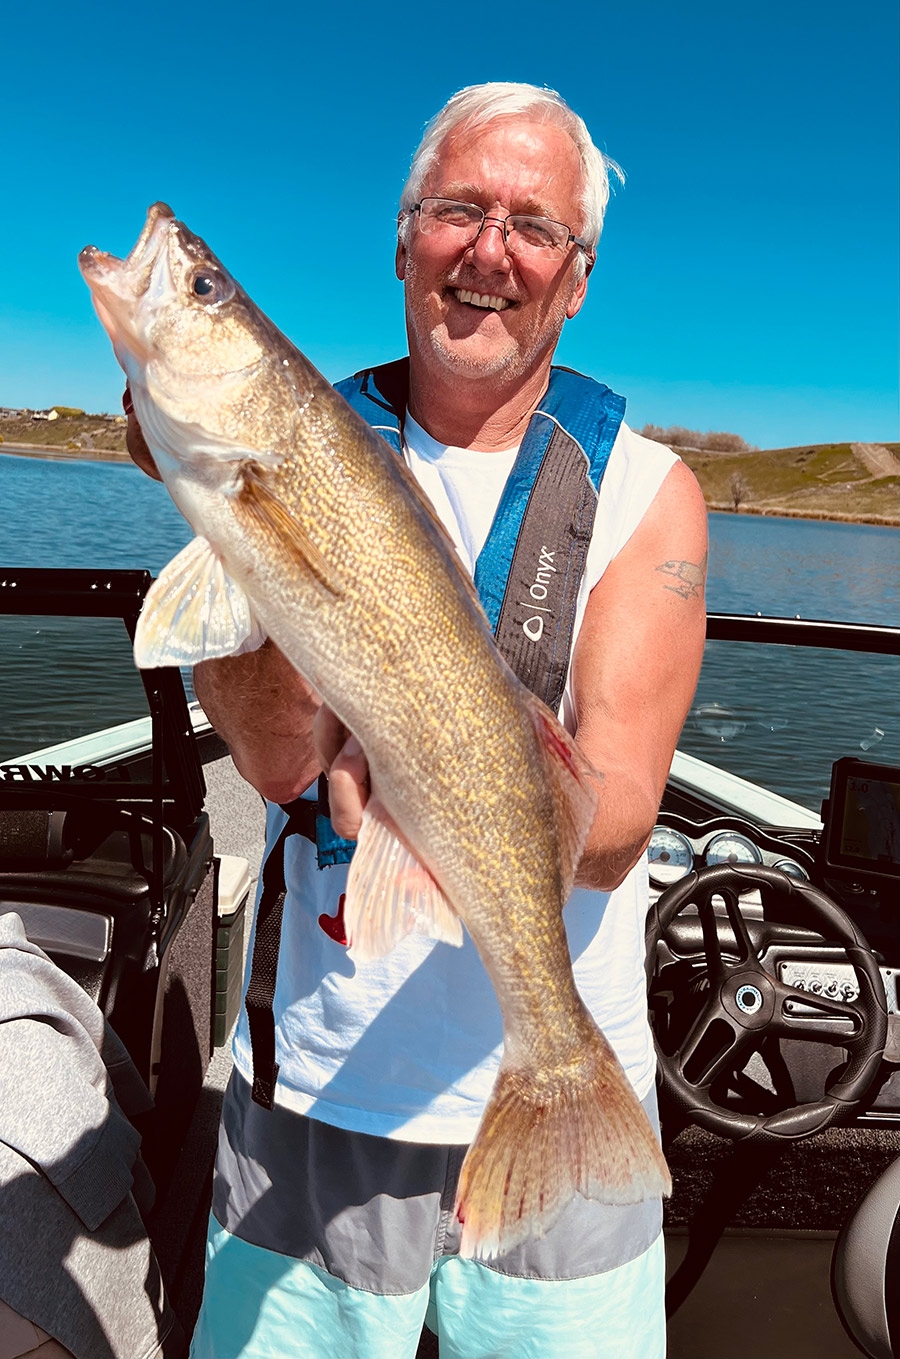 Mike Wren with one of the walleye he landed.